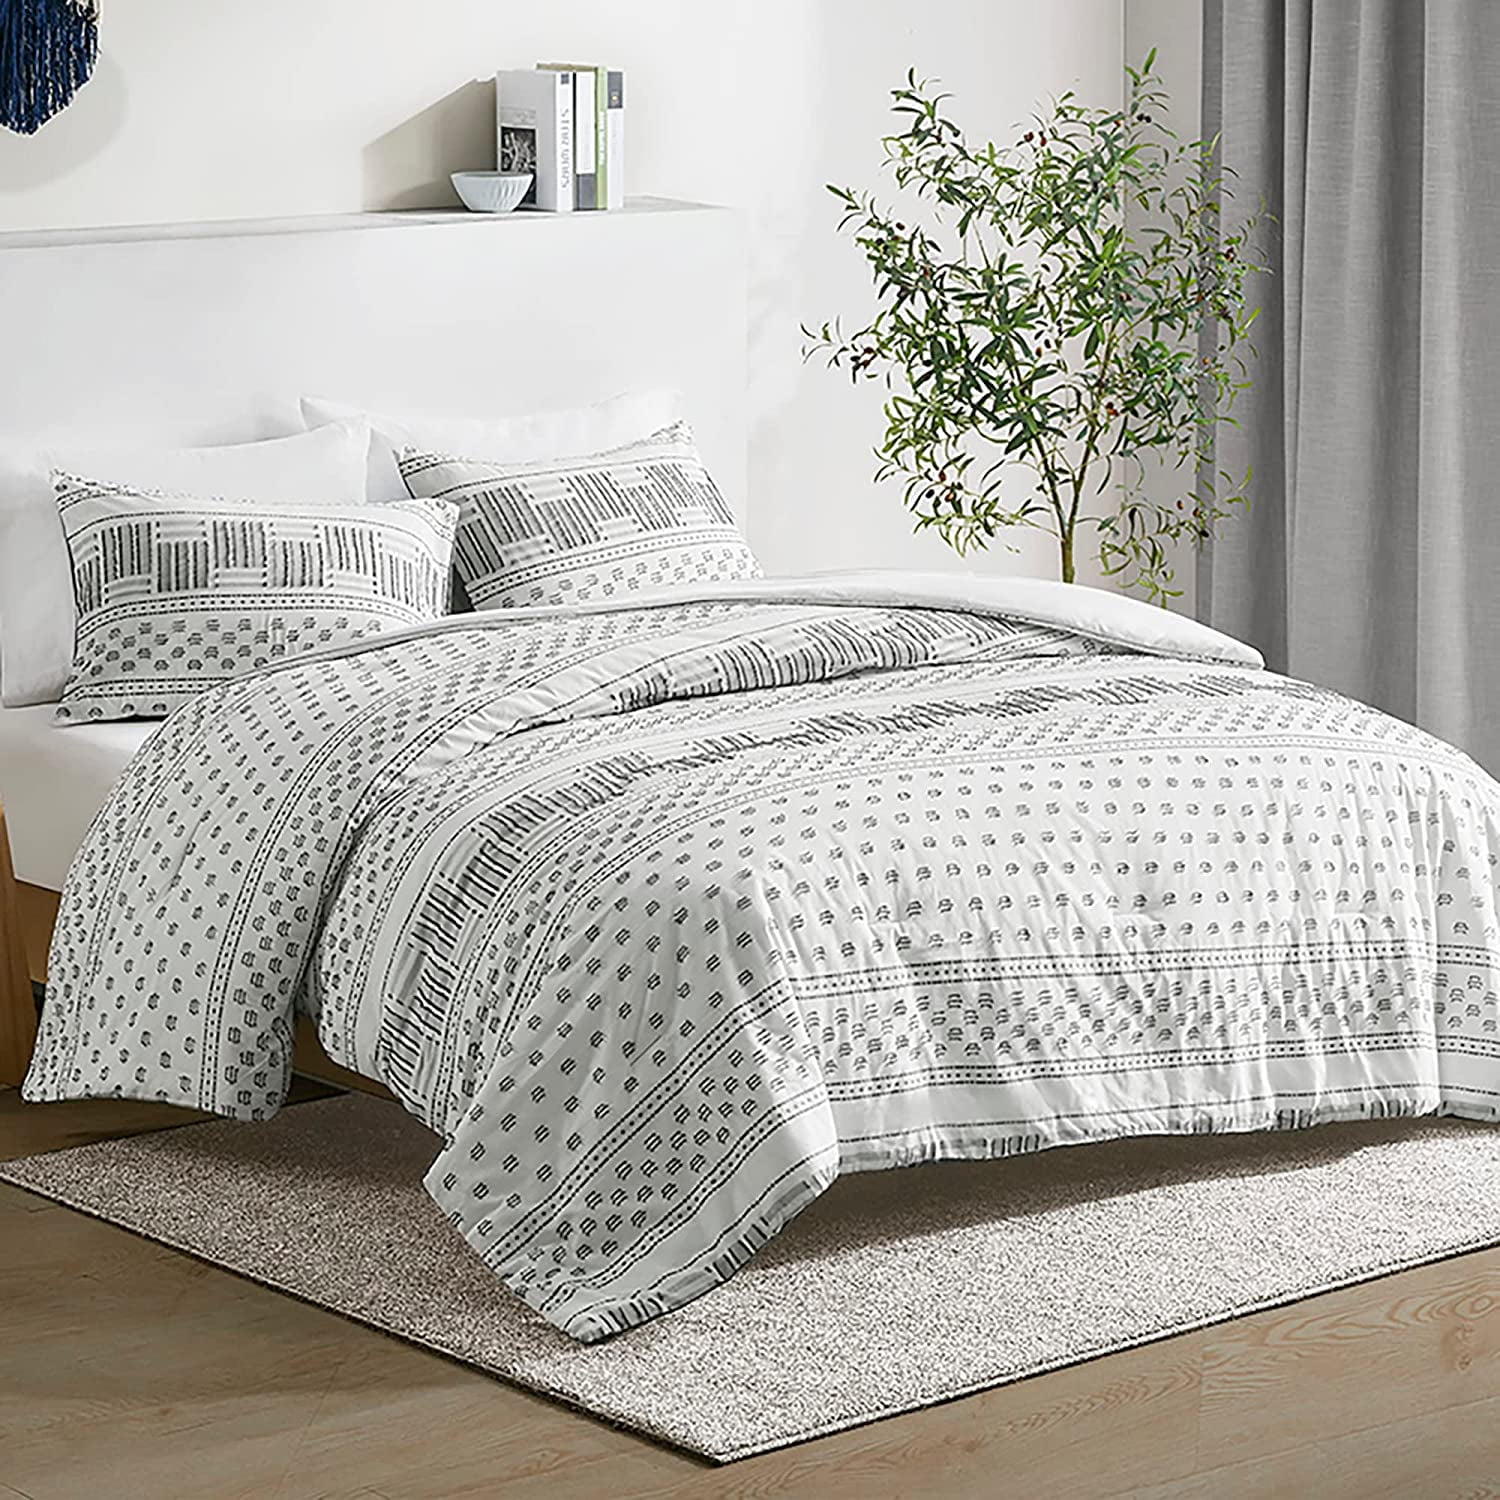 Hyde Lane Farmhouse Bedding Comforter Sets King, Ivory Boho Bed Set,Cotton  Top with Modern Neutral Style Clipped Jacquard Stripes, 3-Pieces Including